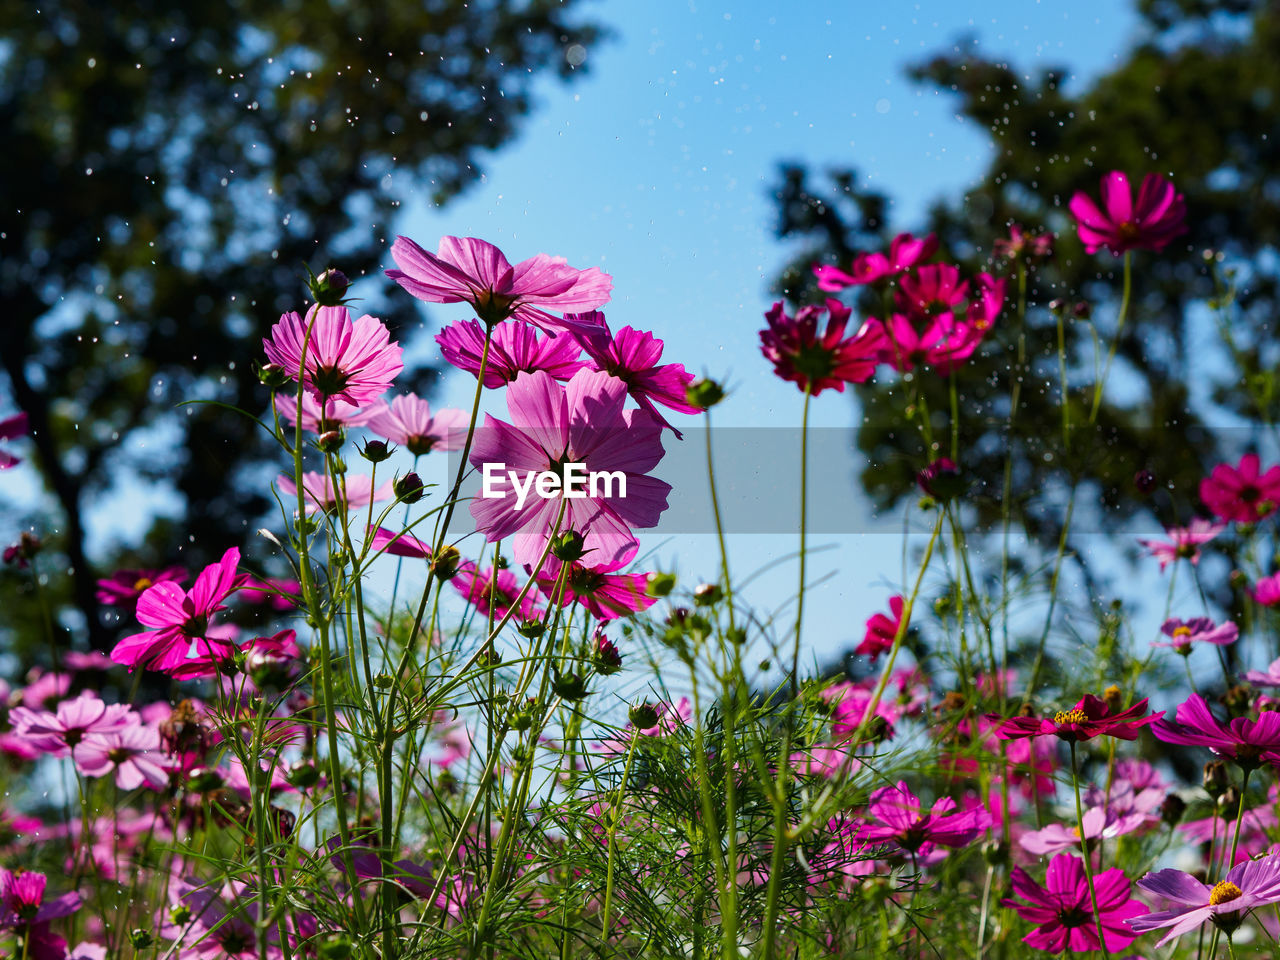 Close-up of pink flowers growing against clear blue sky in park